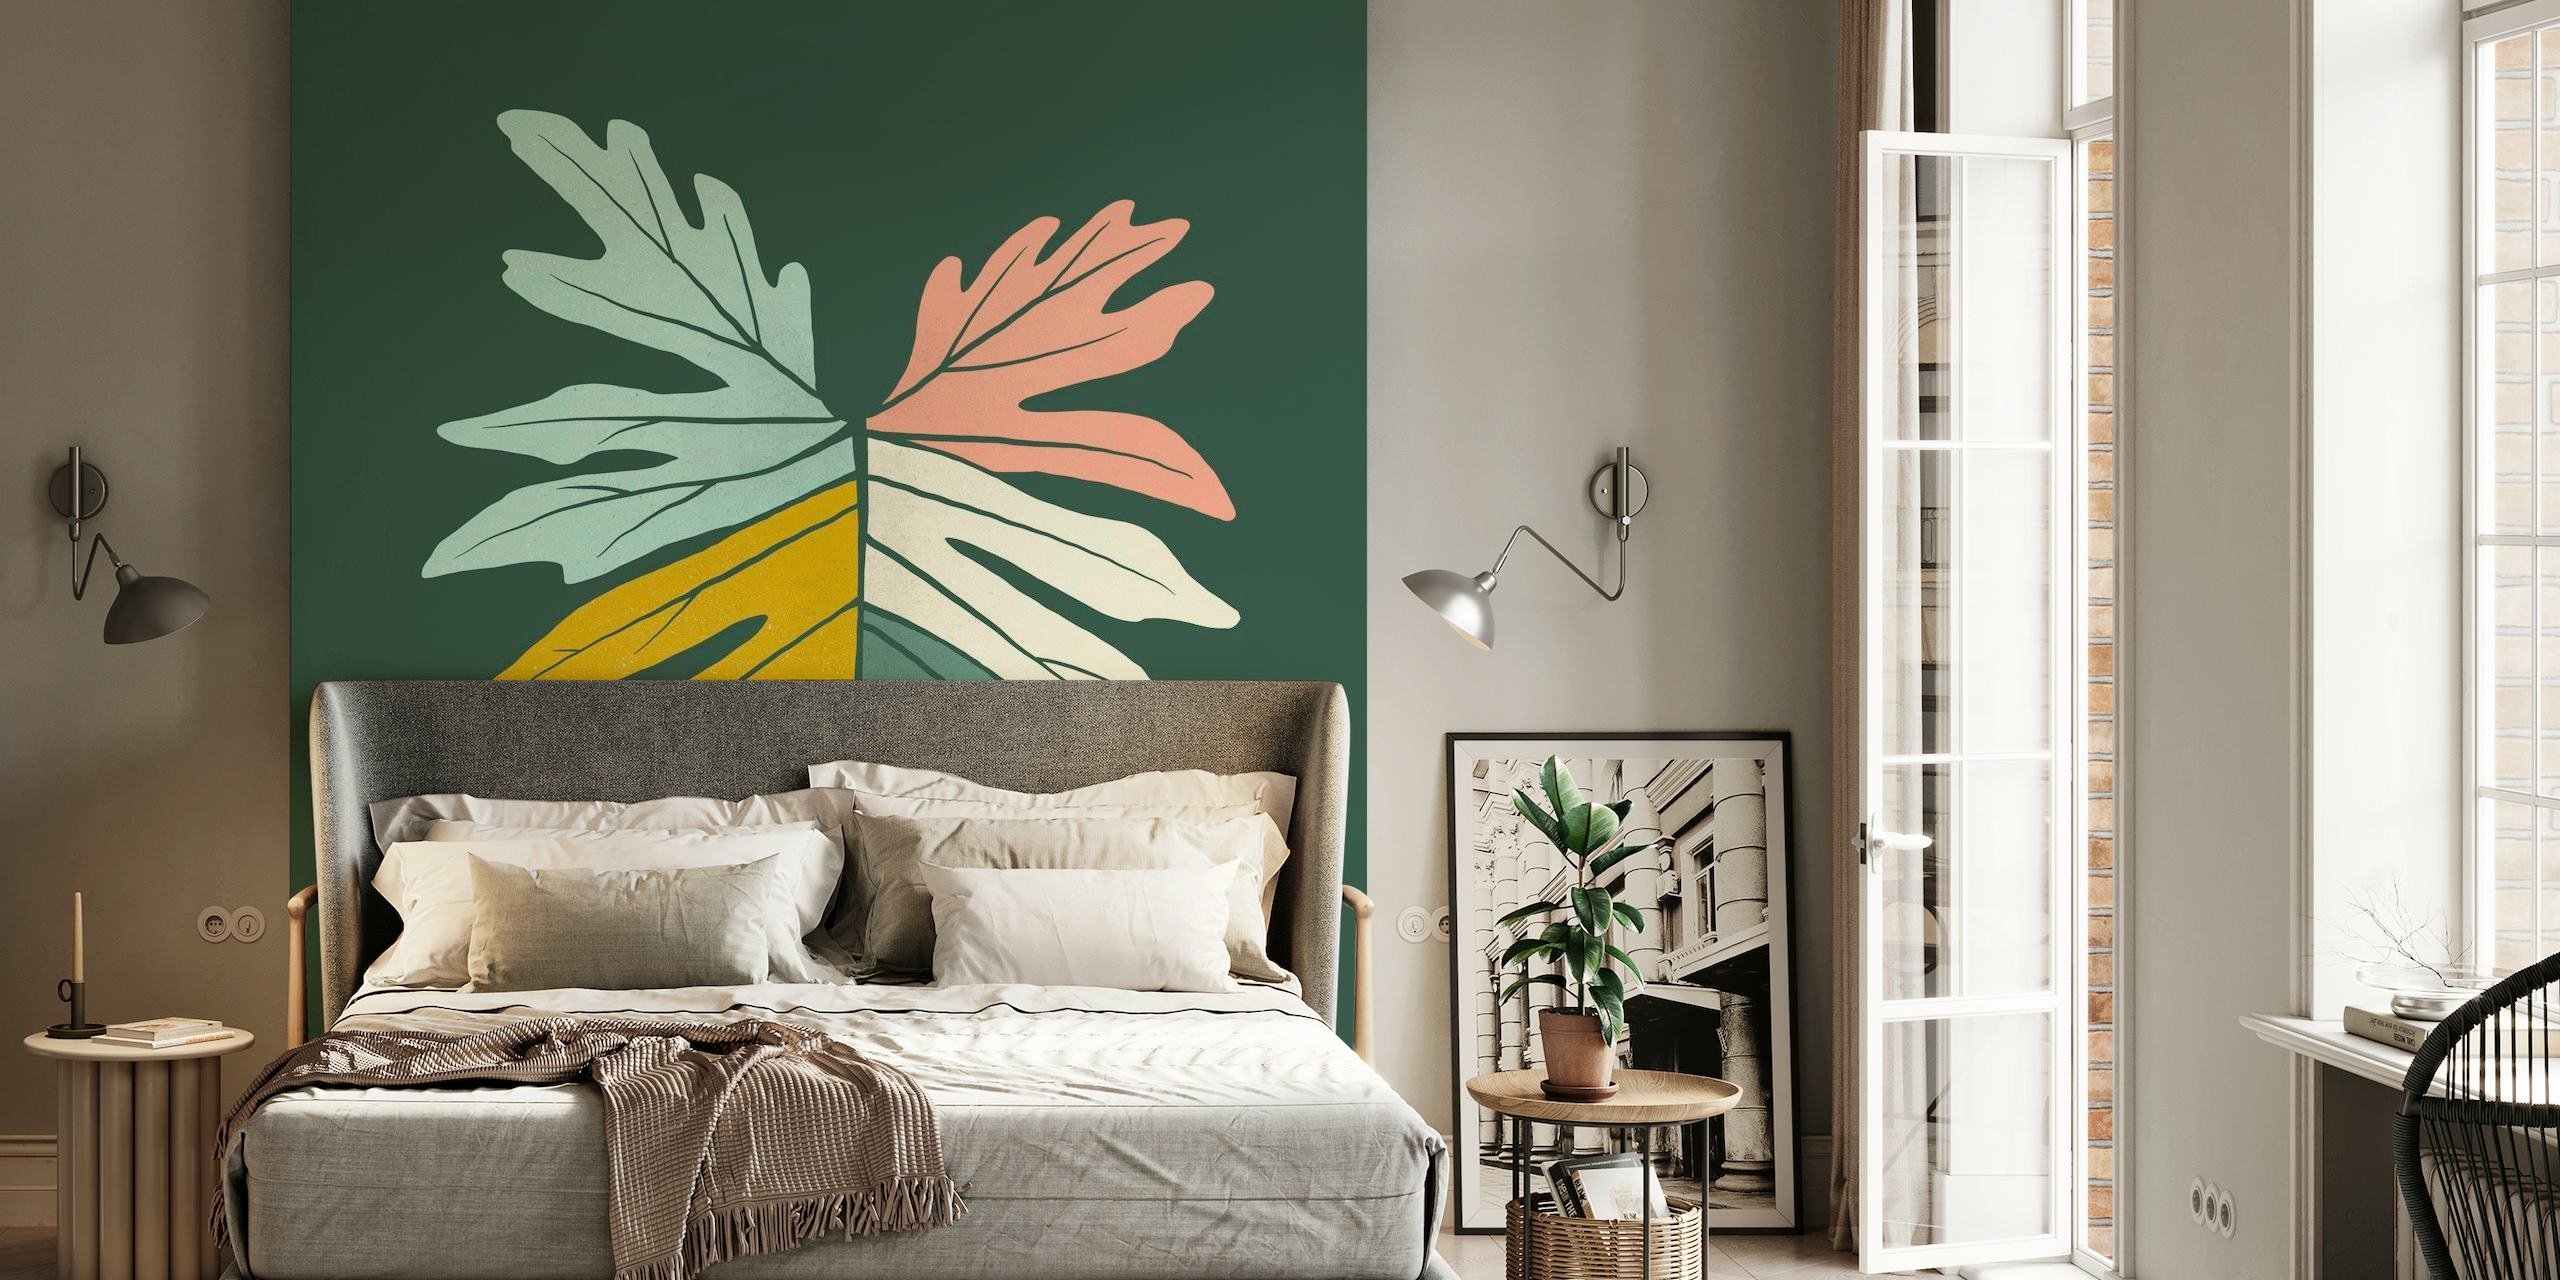 Midcentury Tropical Leaves wall mural with stylized foliage in muted colors